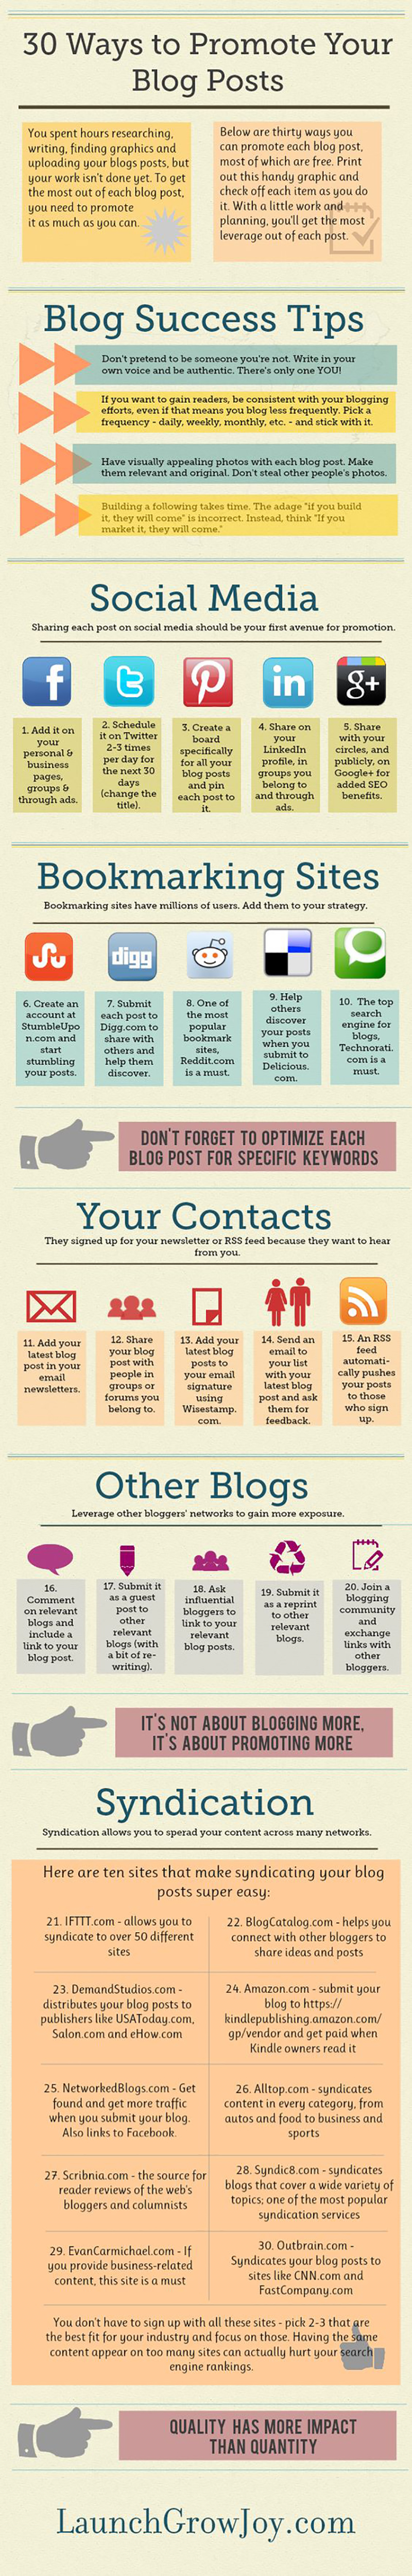 30-ways-to-promote-your-blog-posts-infographic_800pxw